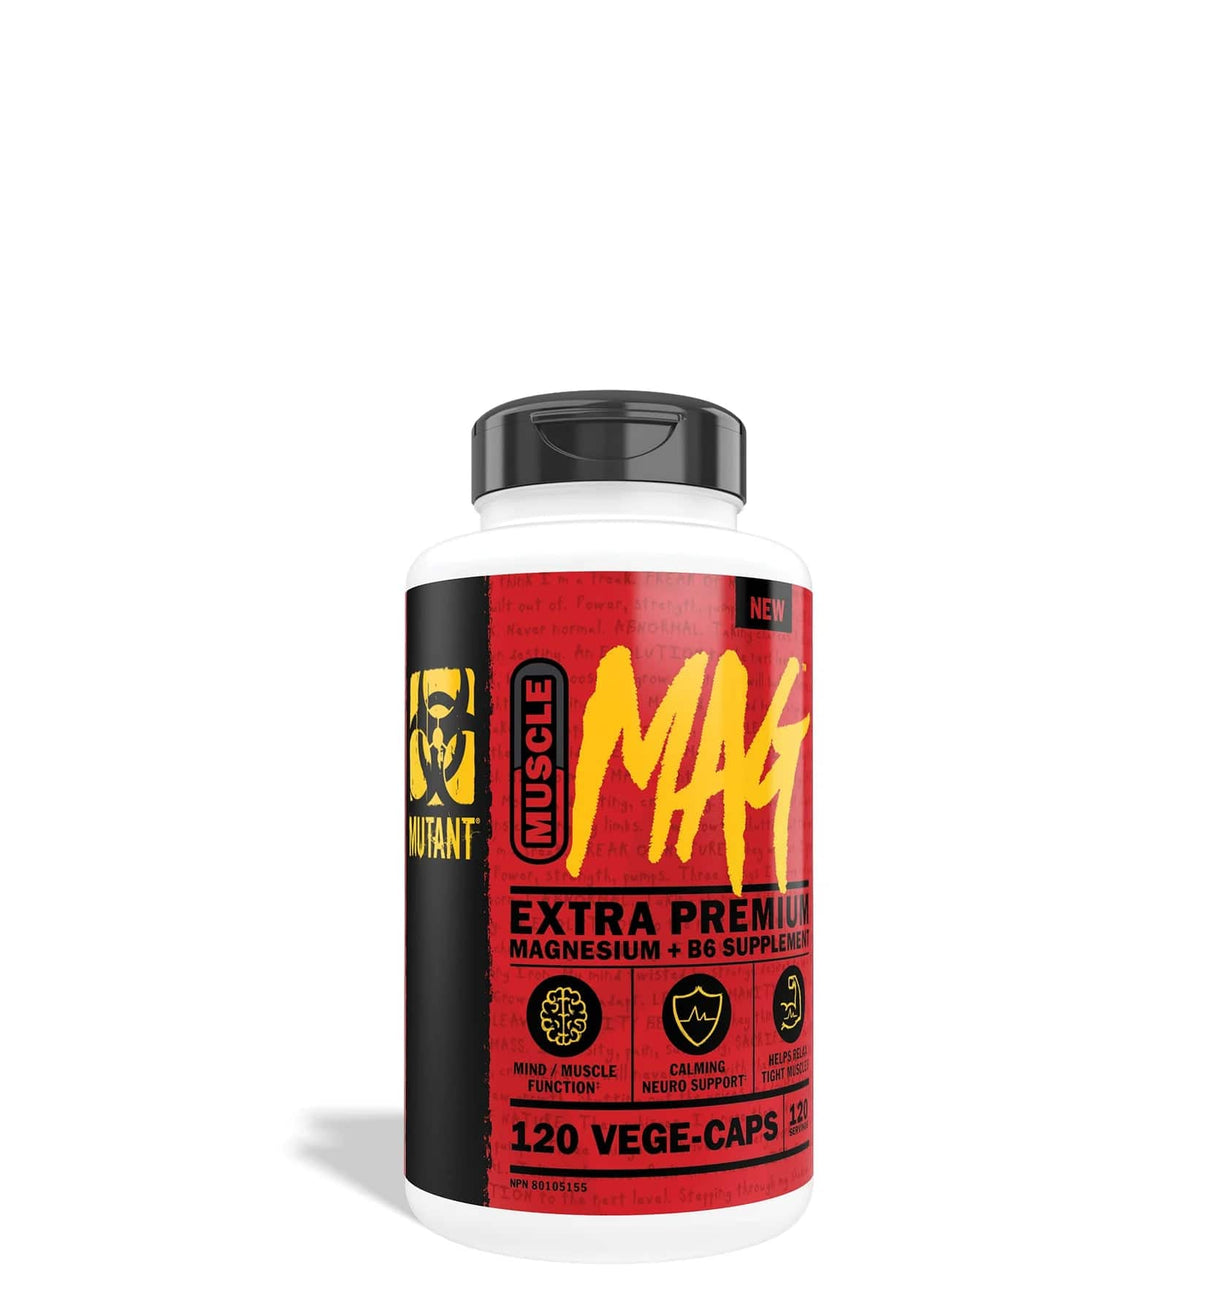 Muscle Mag (Magnesium) - Mutant - Prime Sports Nutrition